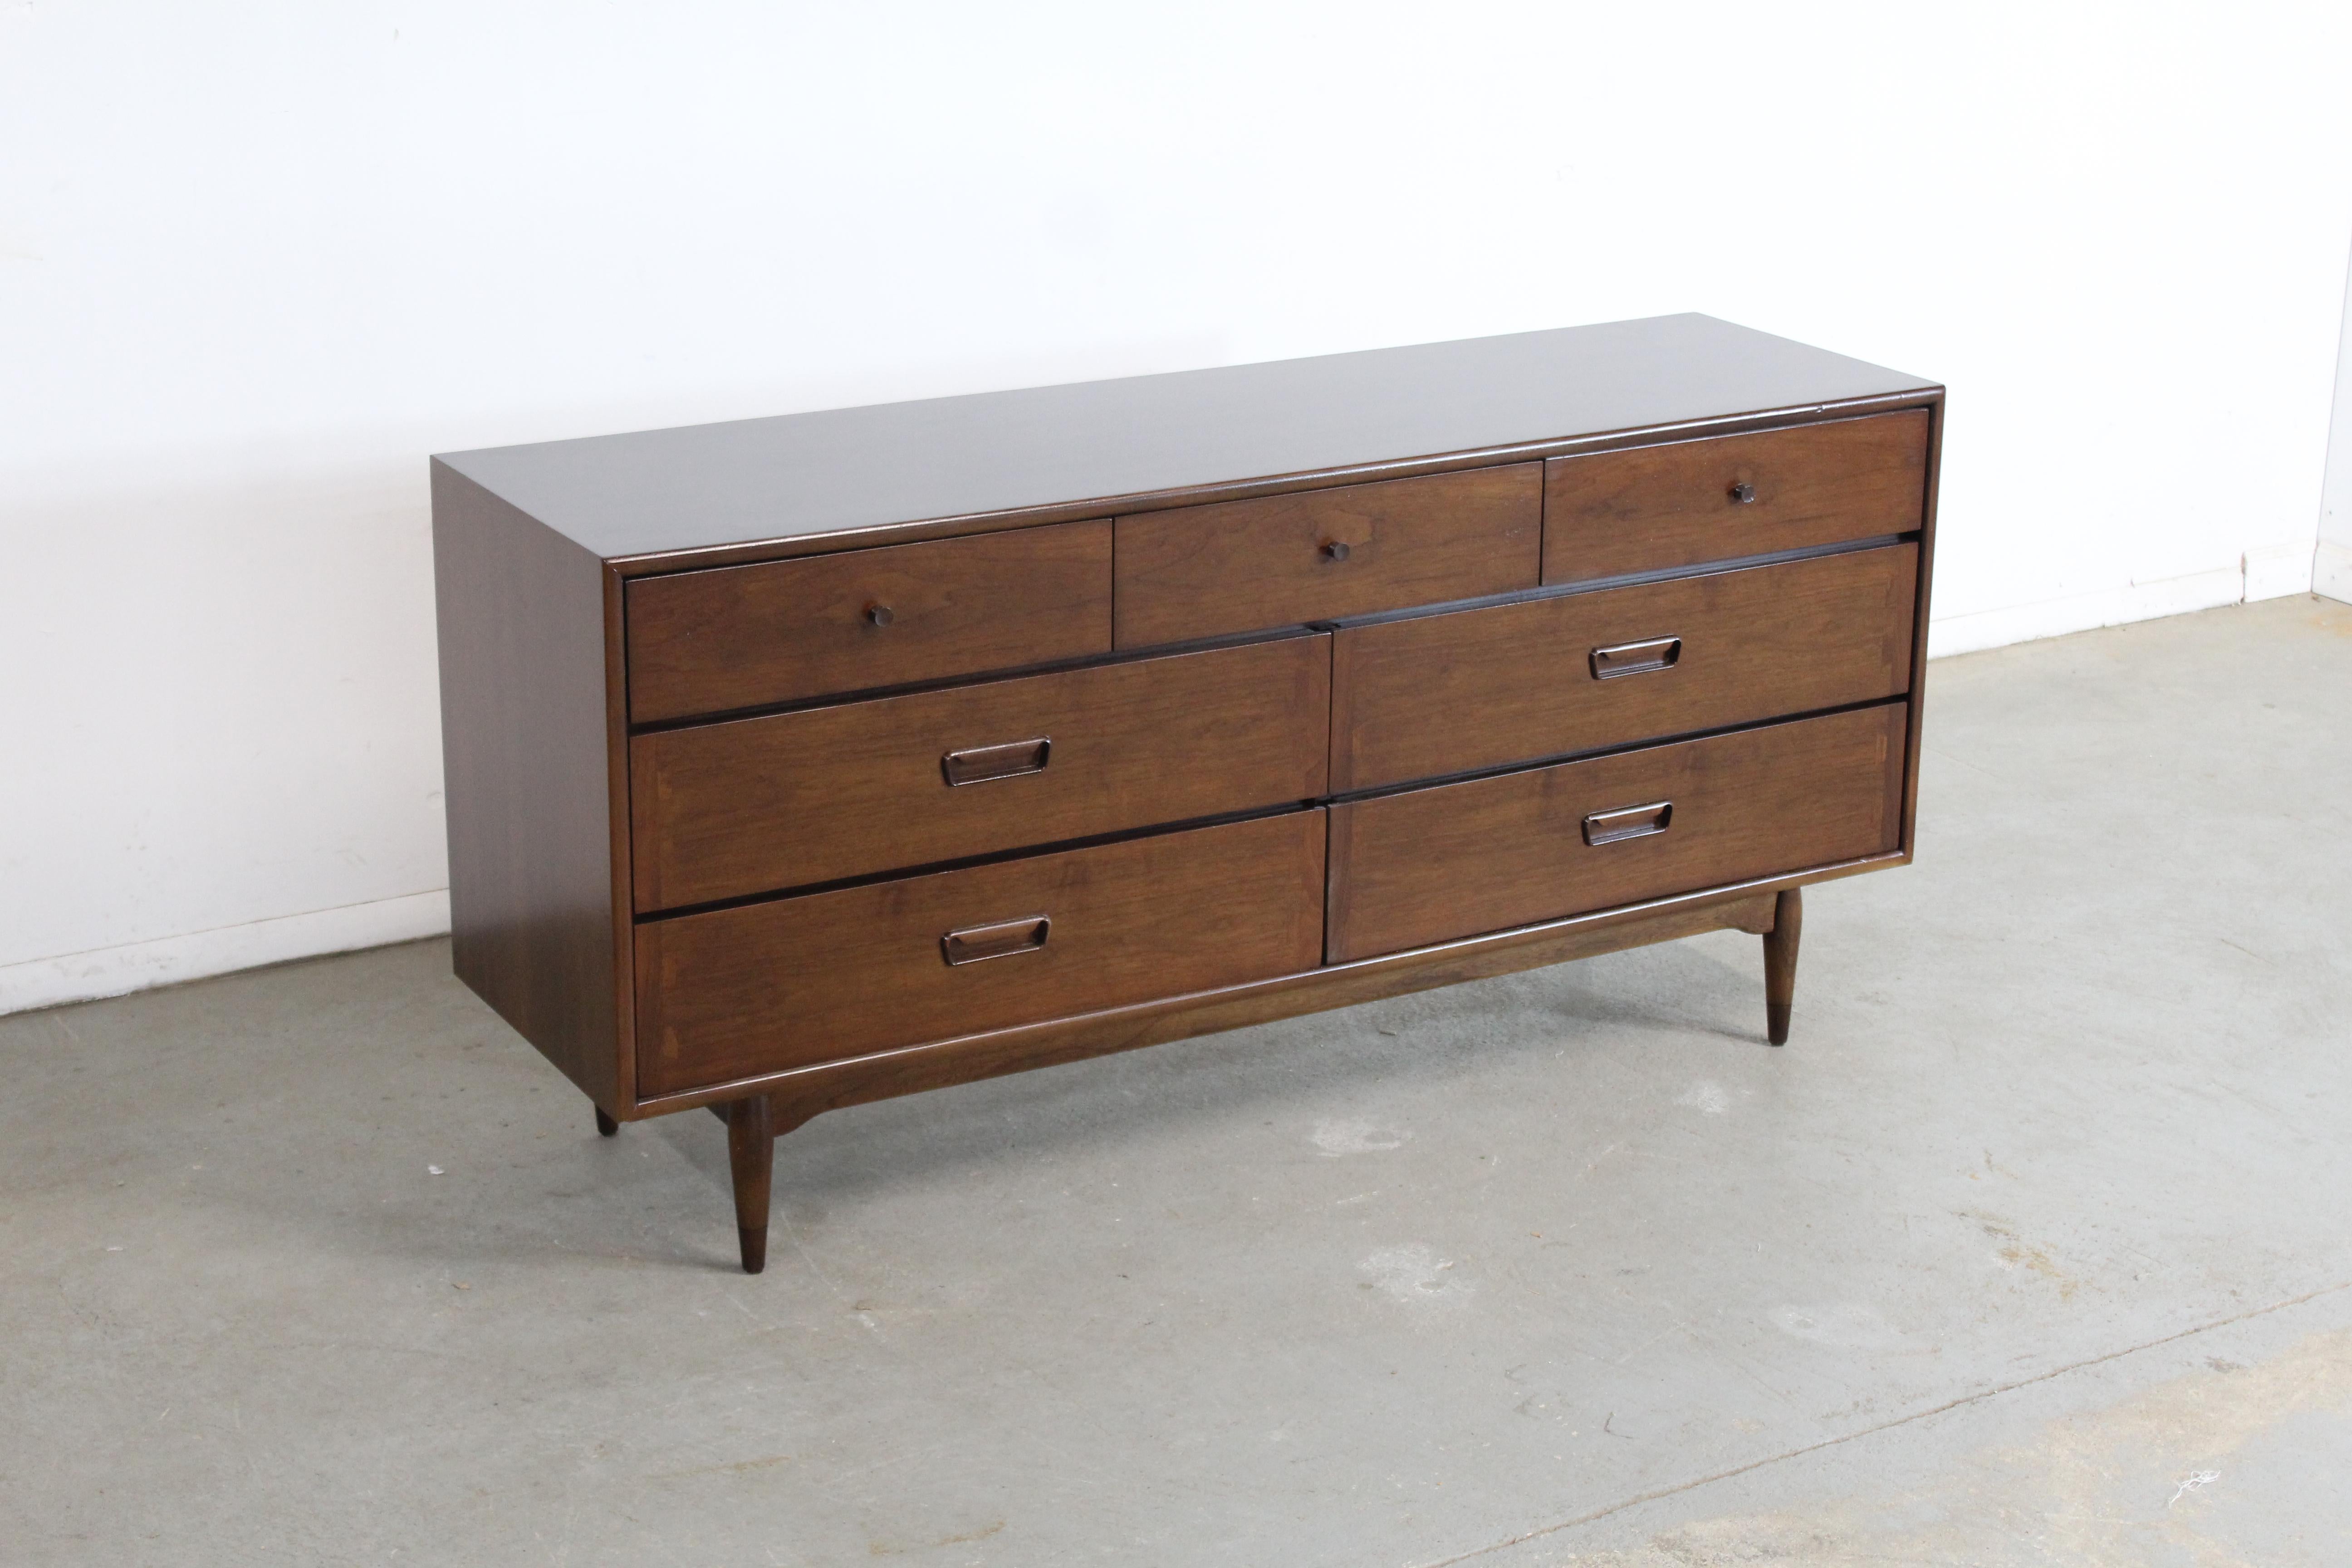 Mid-Century Modern Walnut Andre Bus Dovetail Credenza/Dresser

Offered is a beautiful Mid-Century Modern Walnut Credenza/Dresser with ample storage space, which was designed by Andre Bus for Lane. Features 7 drawers and is elevated. The dove tail